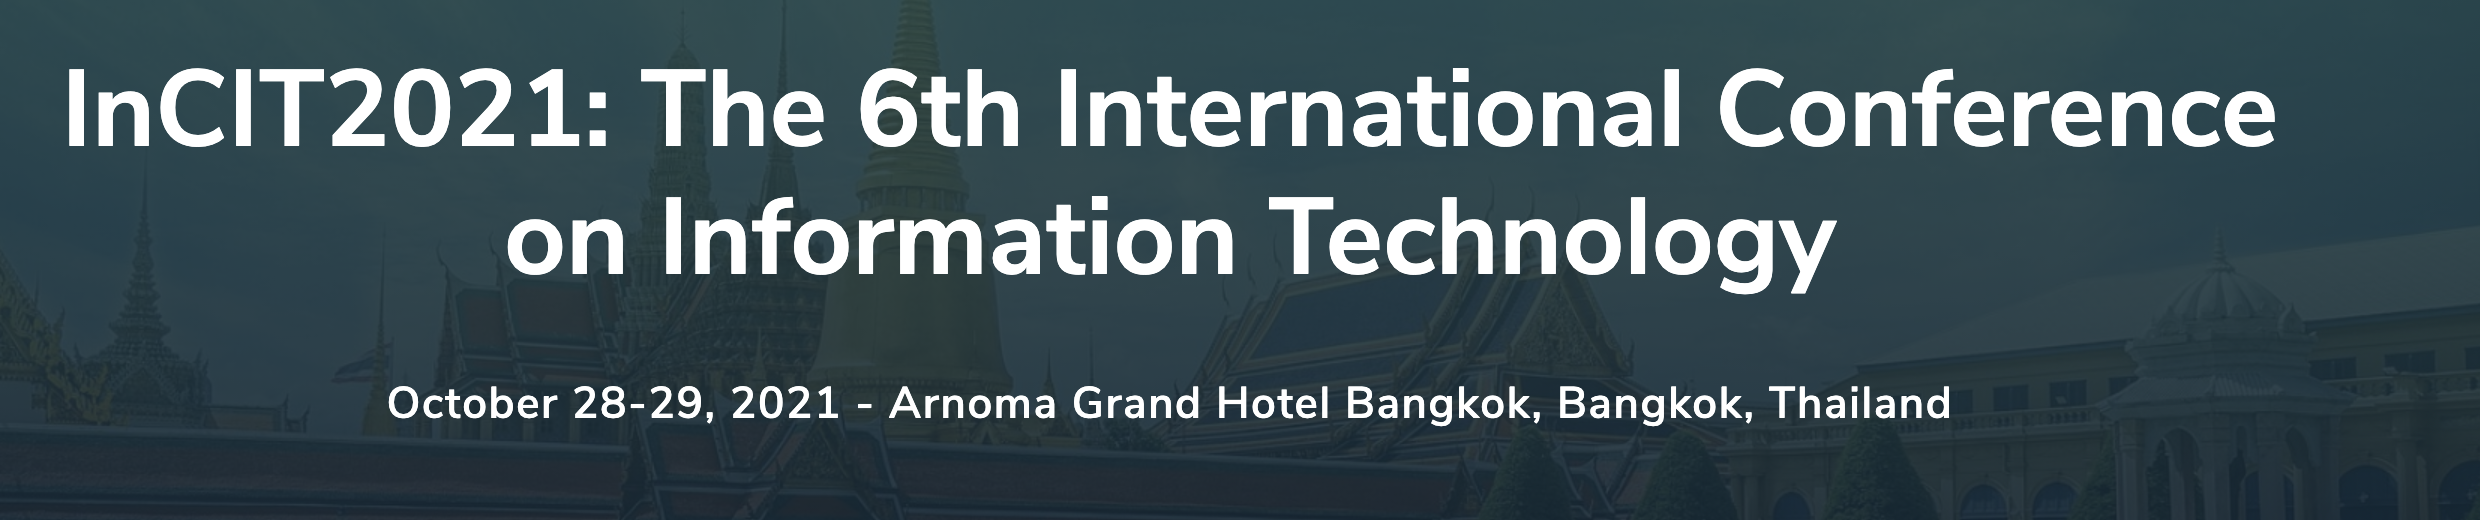 InCIT2021: The 6th International Conference on Information Technology